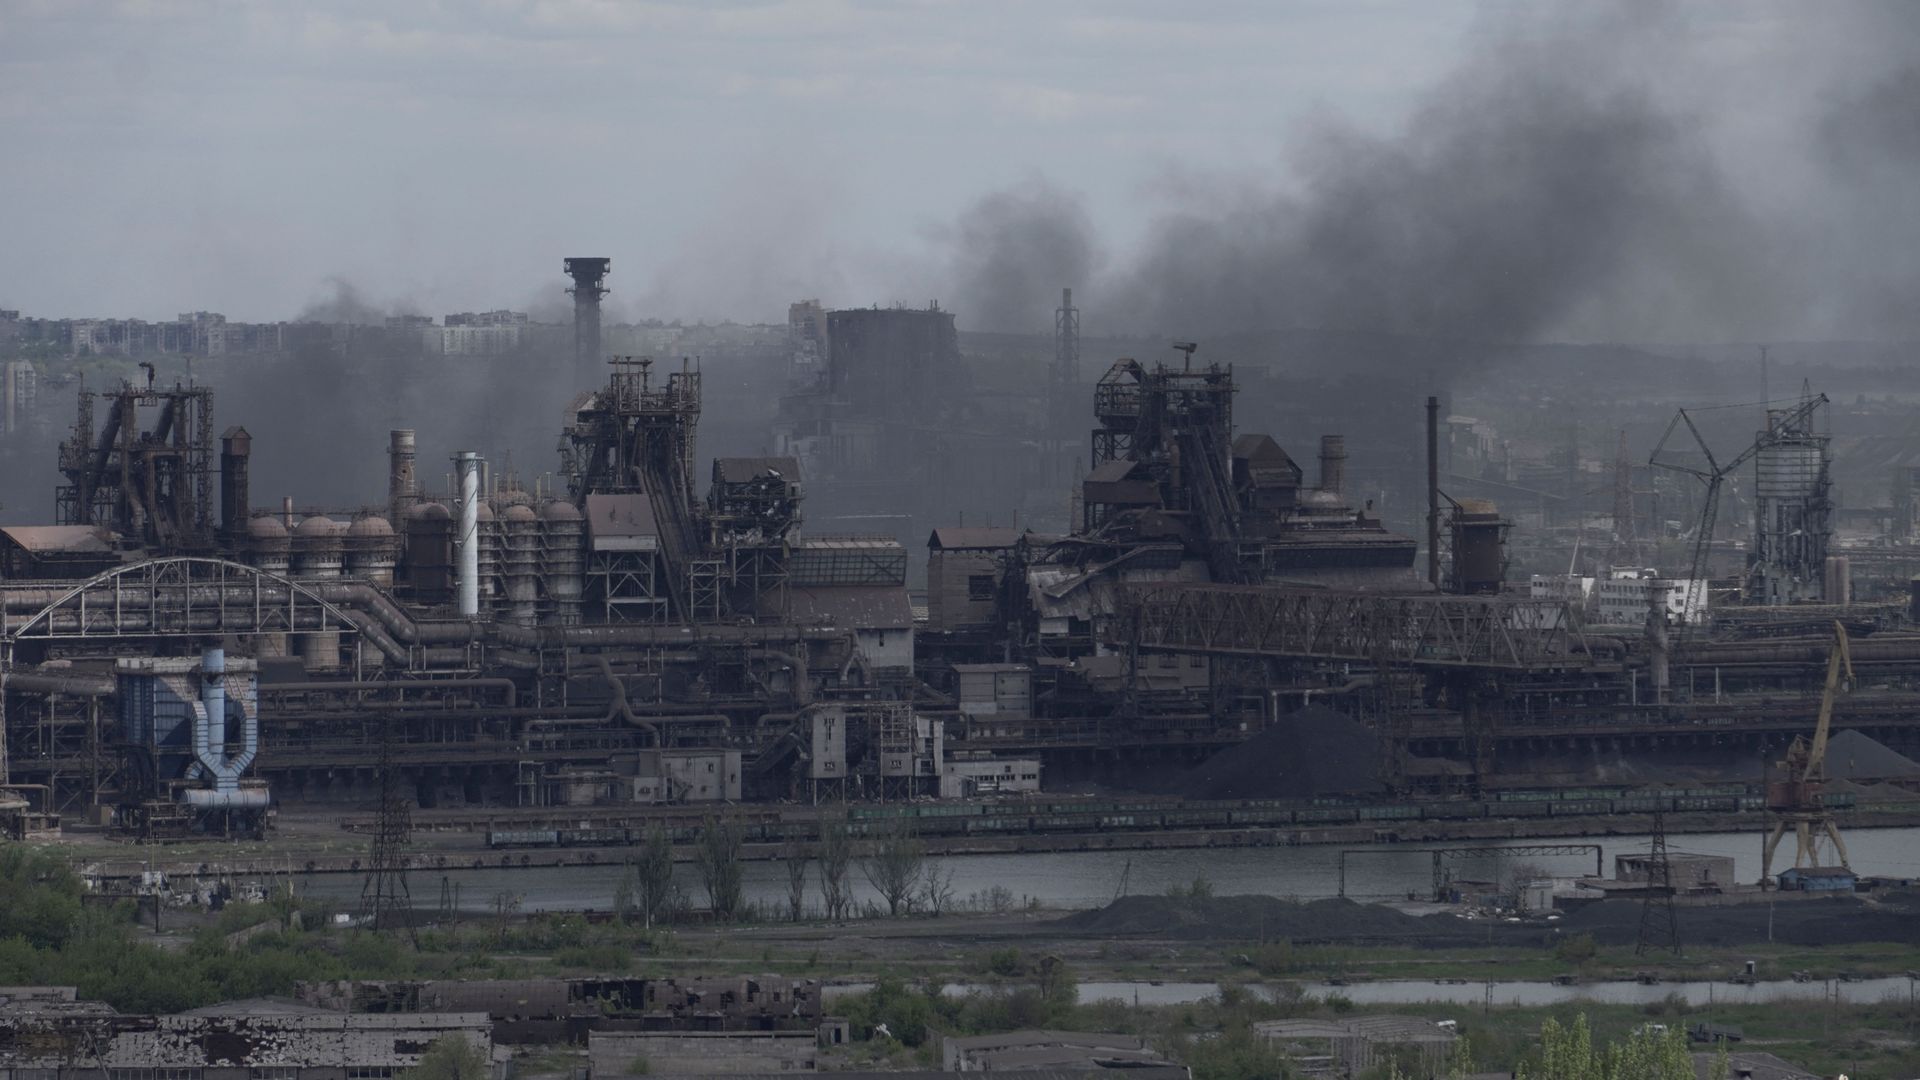 A view of the Azovstal steel plant in Mariupol, Ukraine, on May 10.